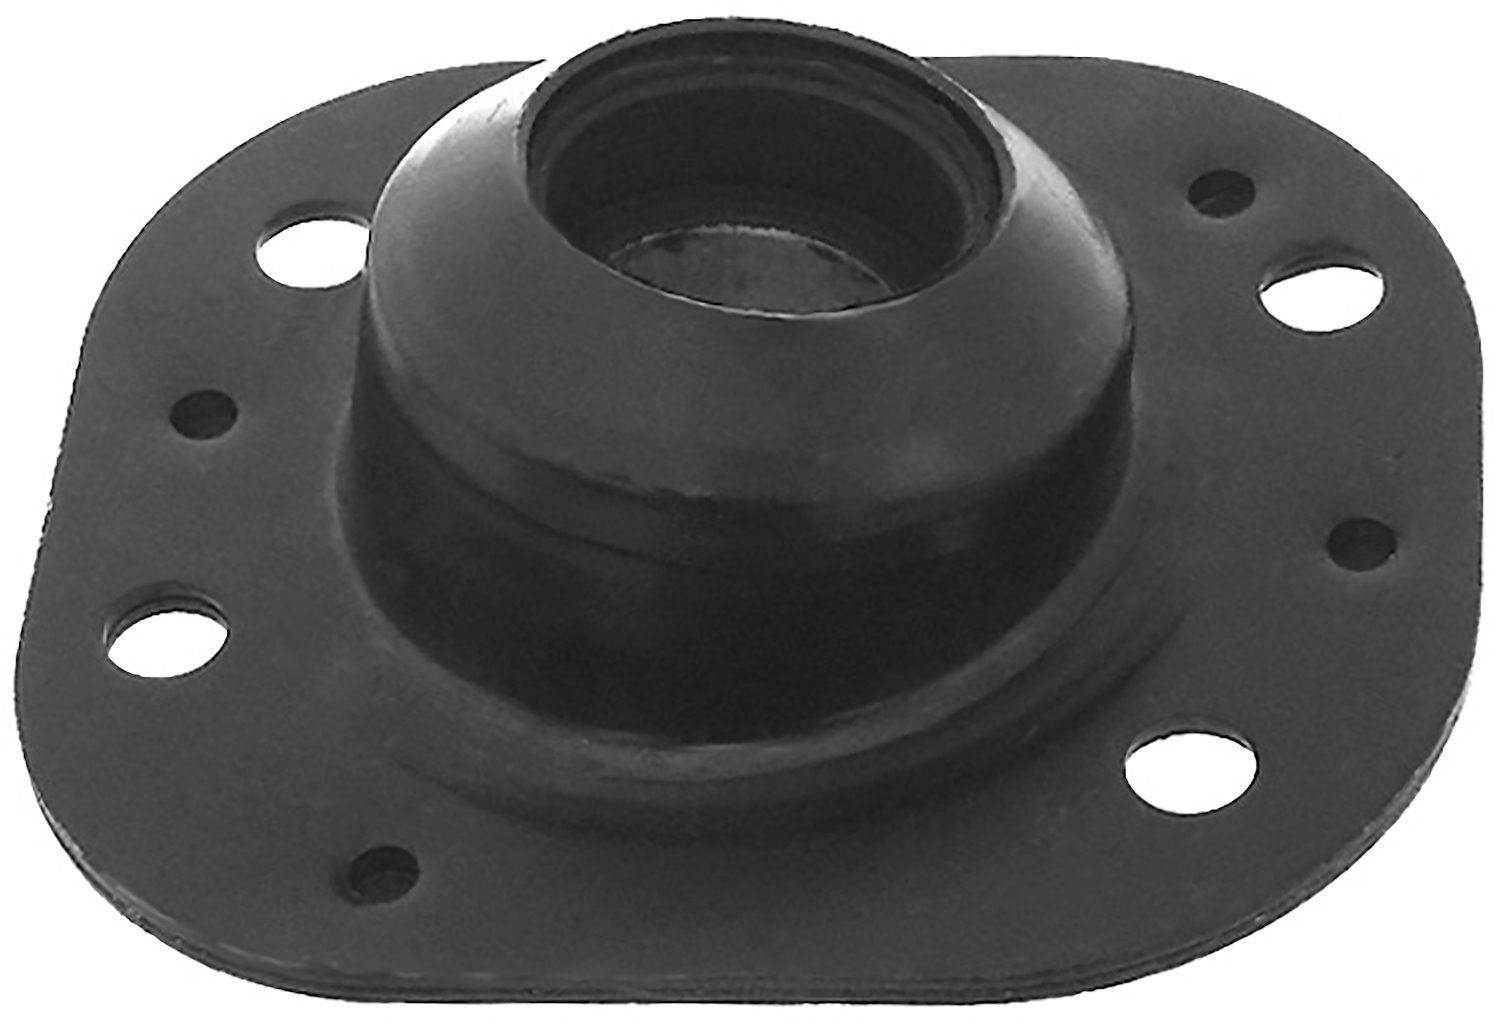 Left Rear Strut Mount for 2005-2007 Ford Five Hundred/Freestyle/Mercury Montego and 2008-2009 Ford Taurus/Mercury Sable